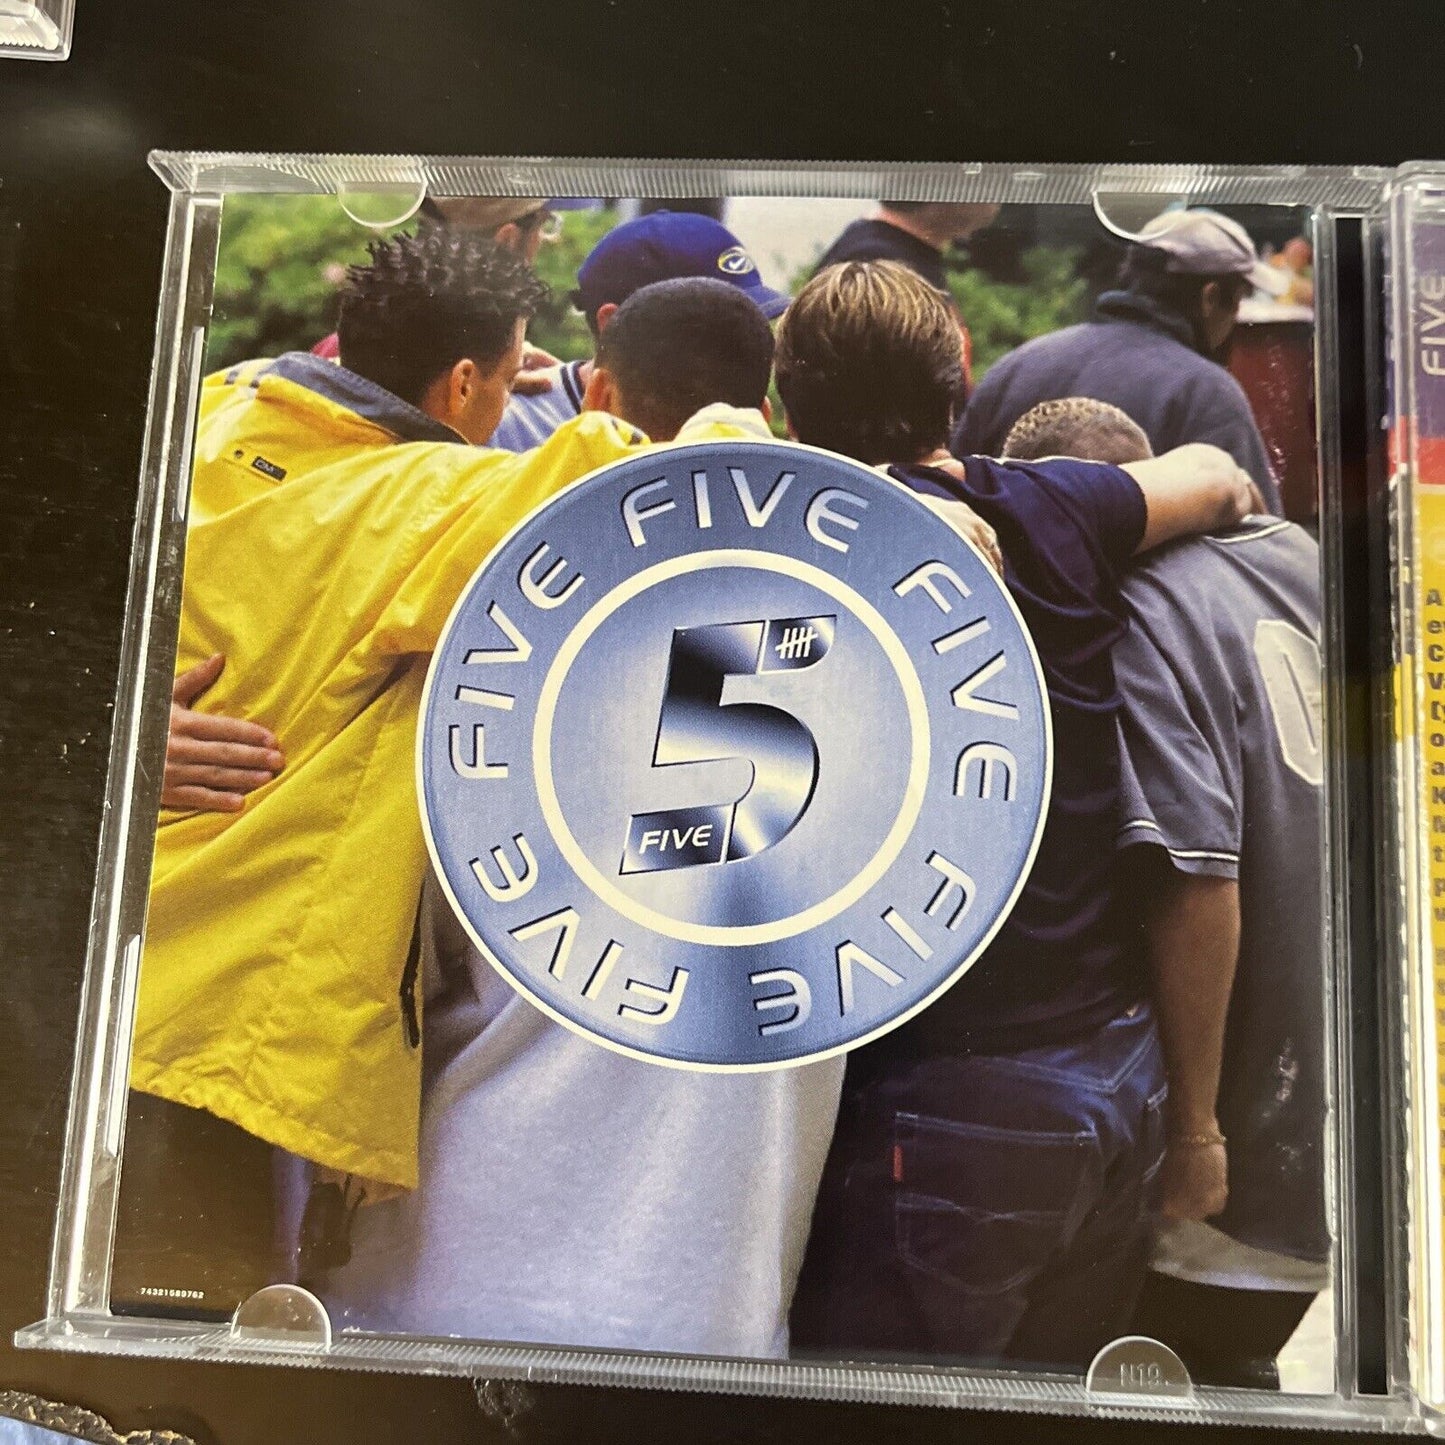 5ive: The Album by Five (CD, 1998)